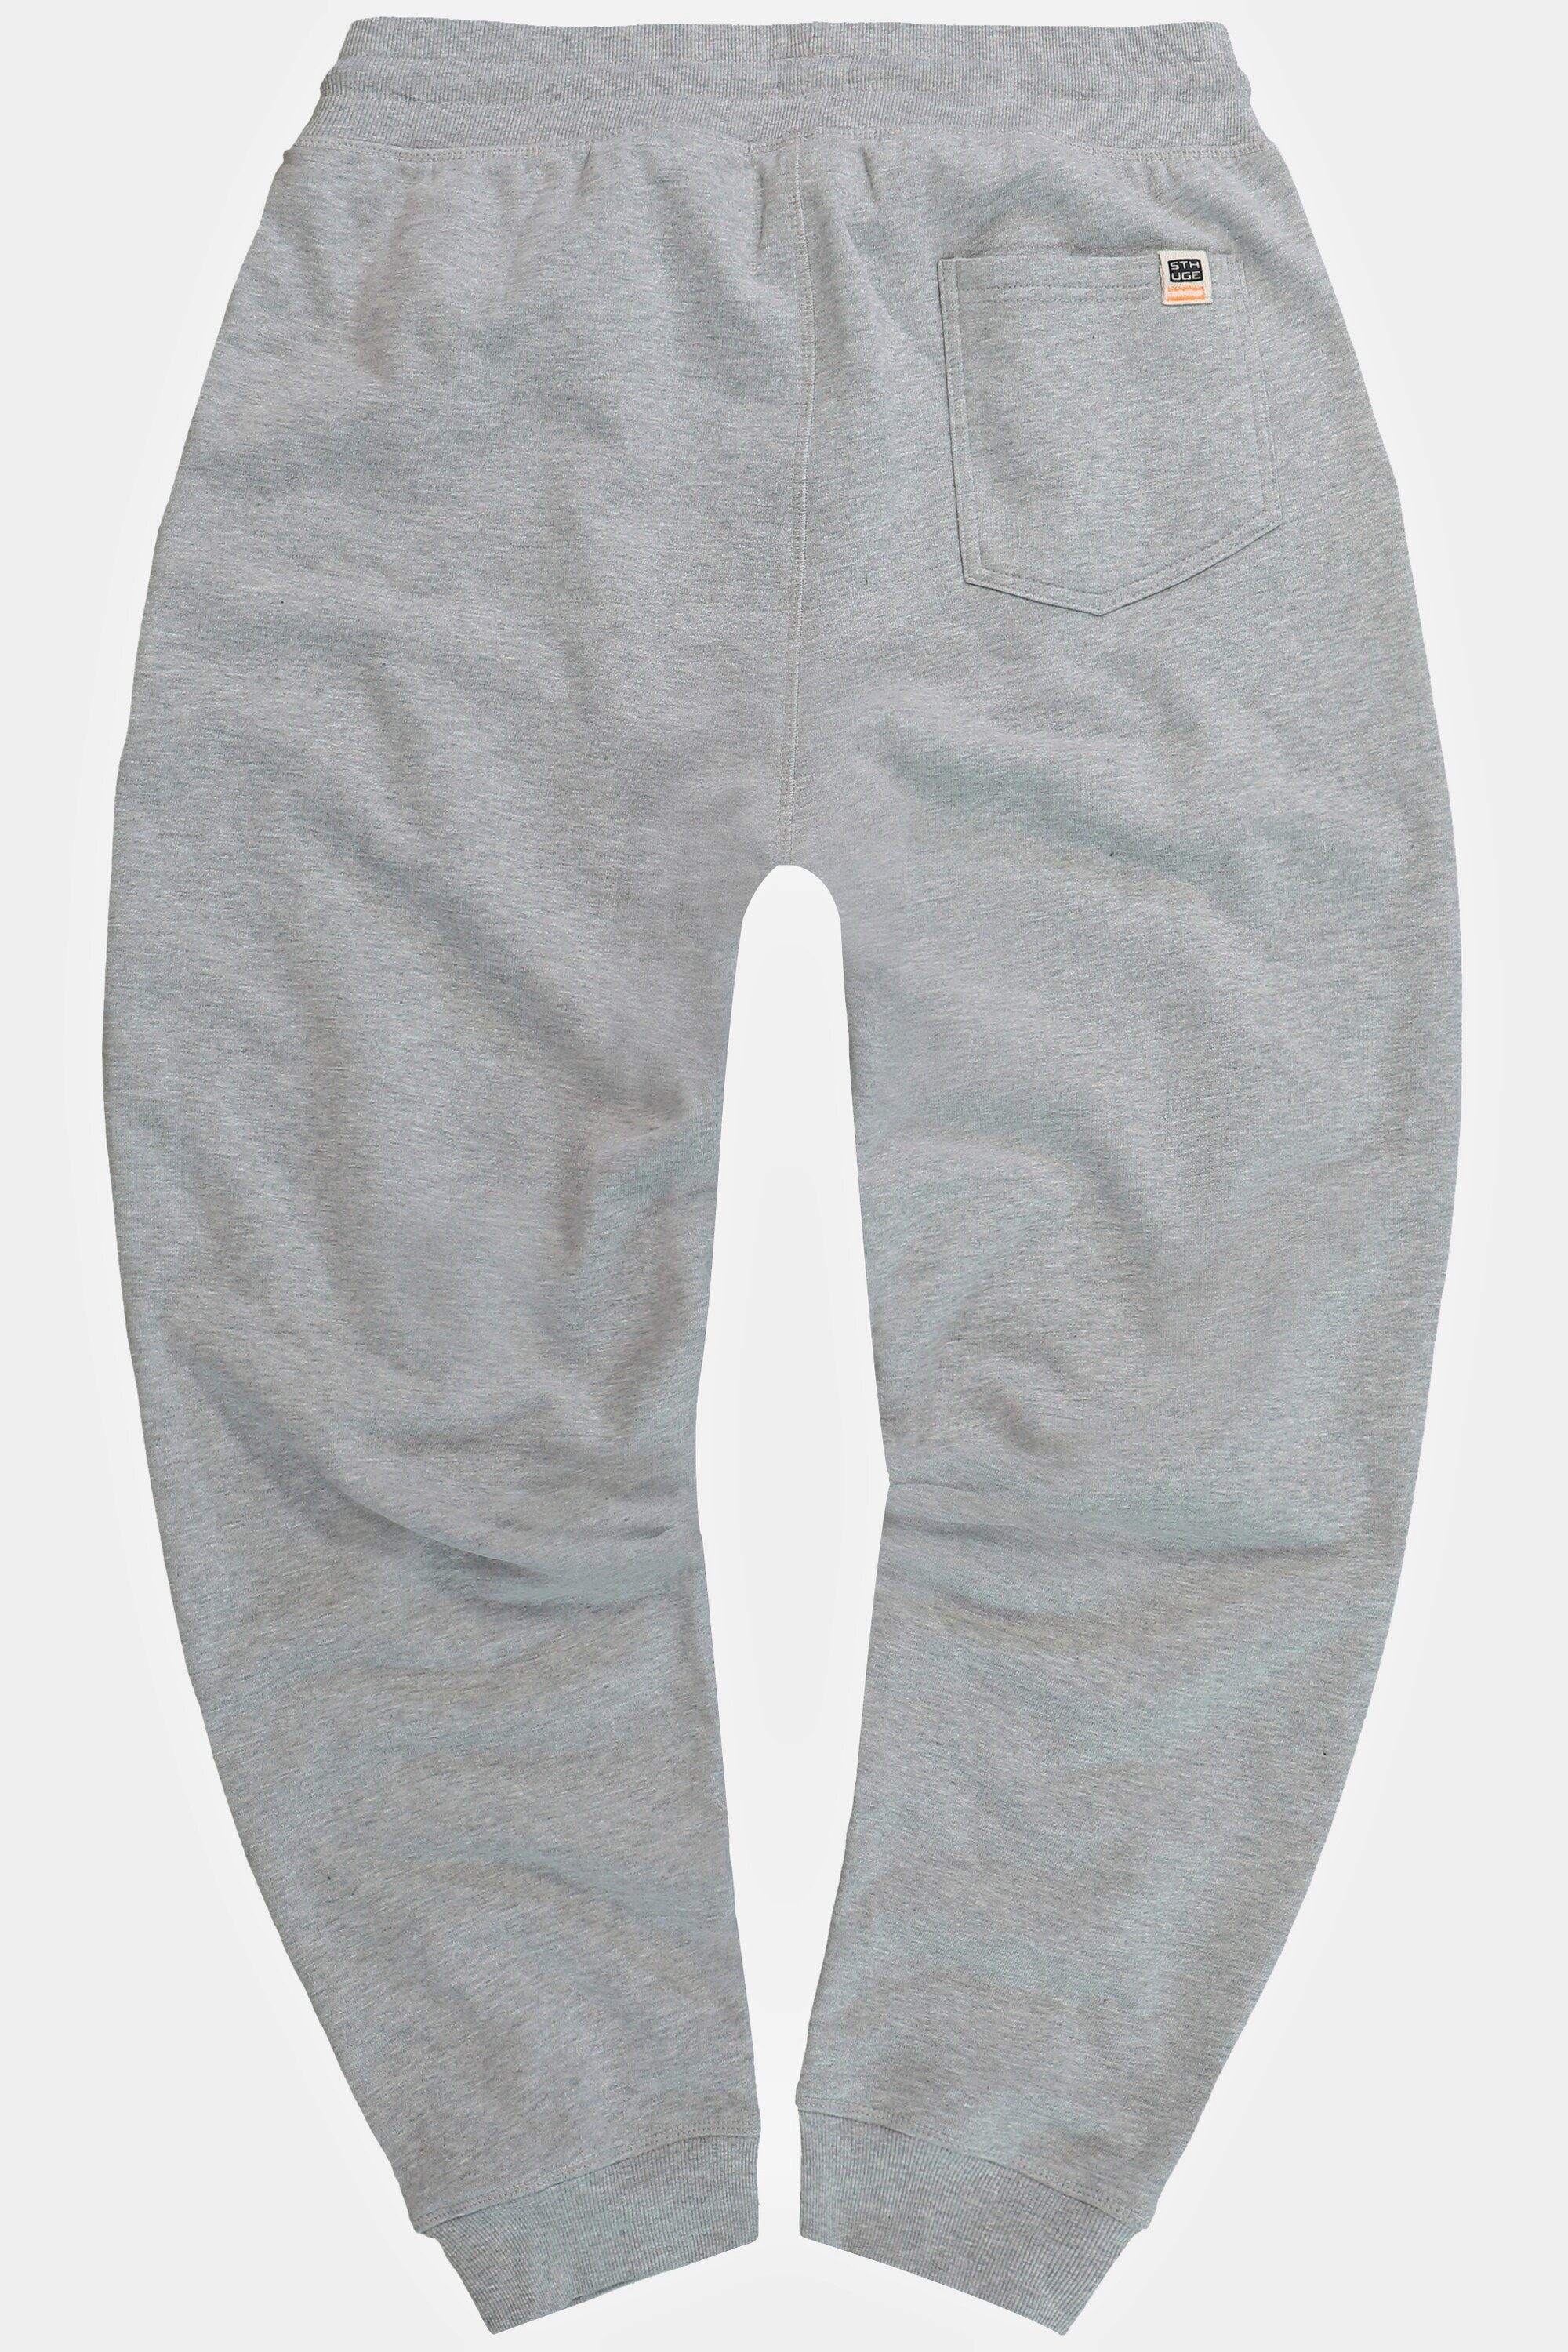 Relaxed Taschen STHUGE Jogginghose Fit STHUGE mit Sweathose